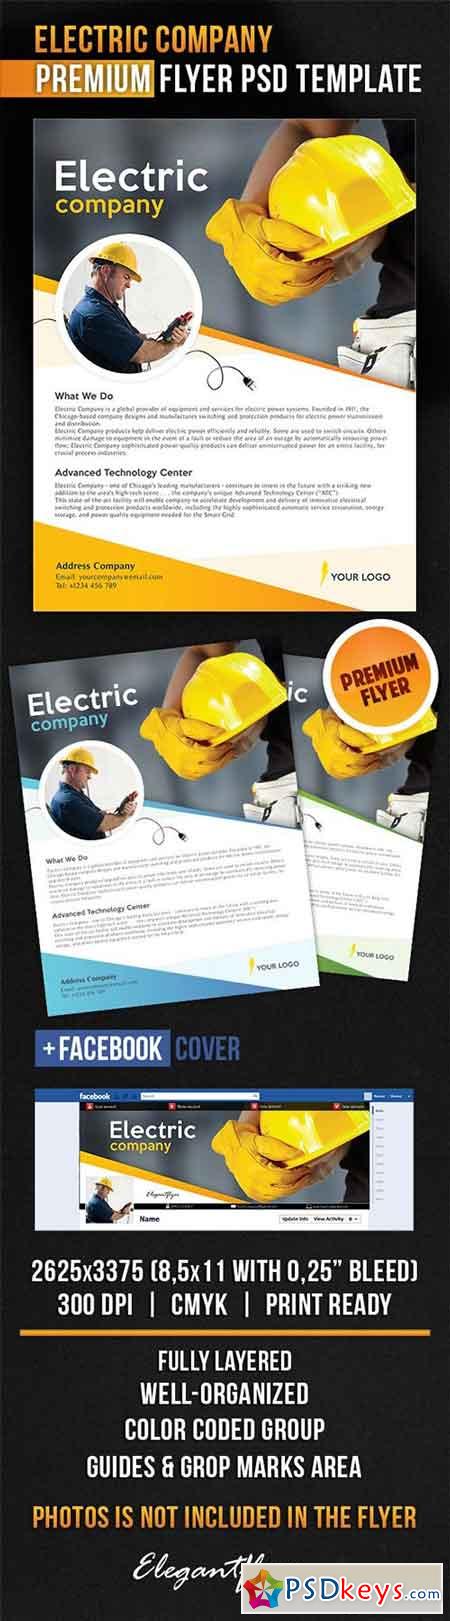 Electric Company Flyer PSD Template + Facebook Cover